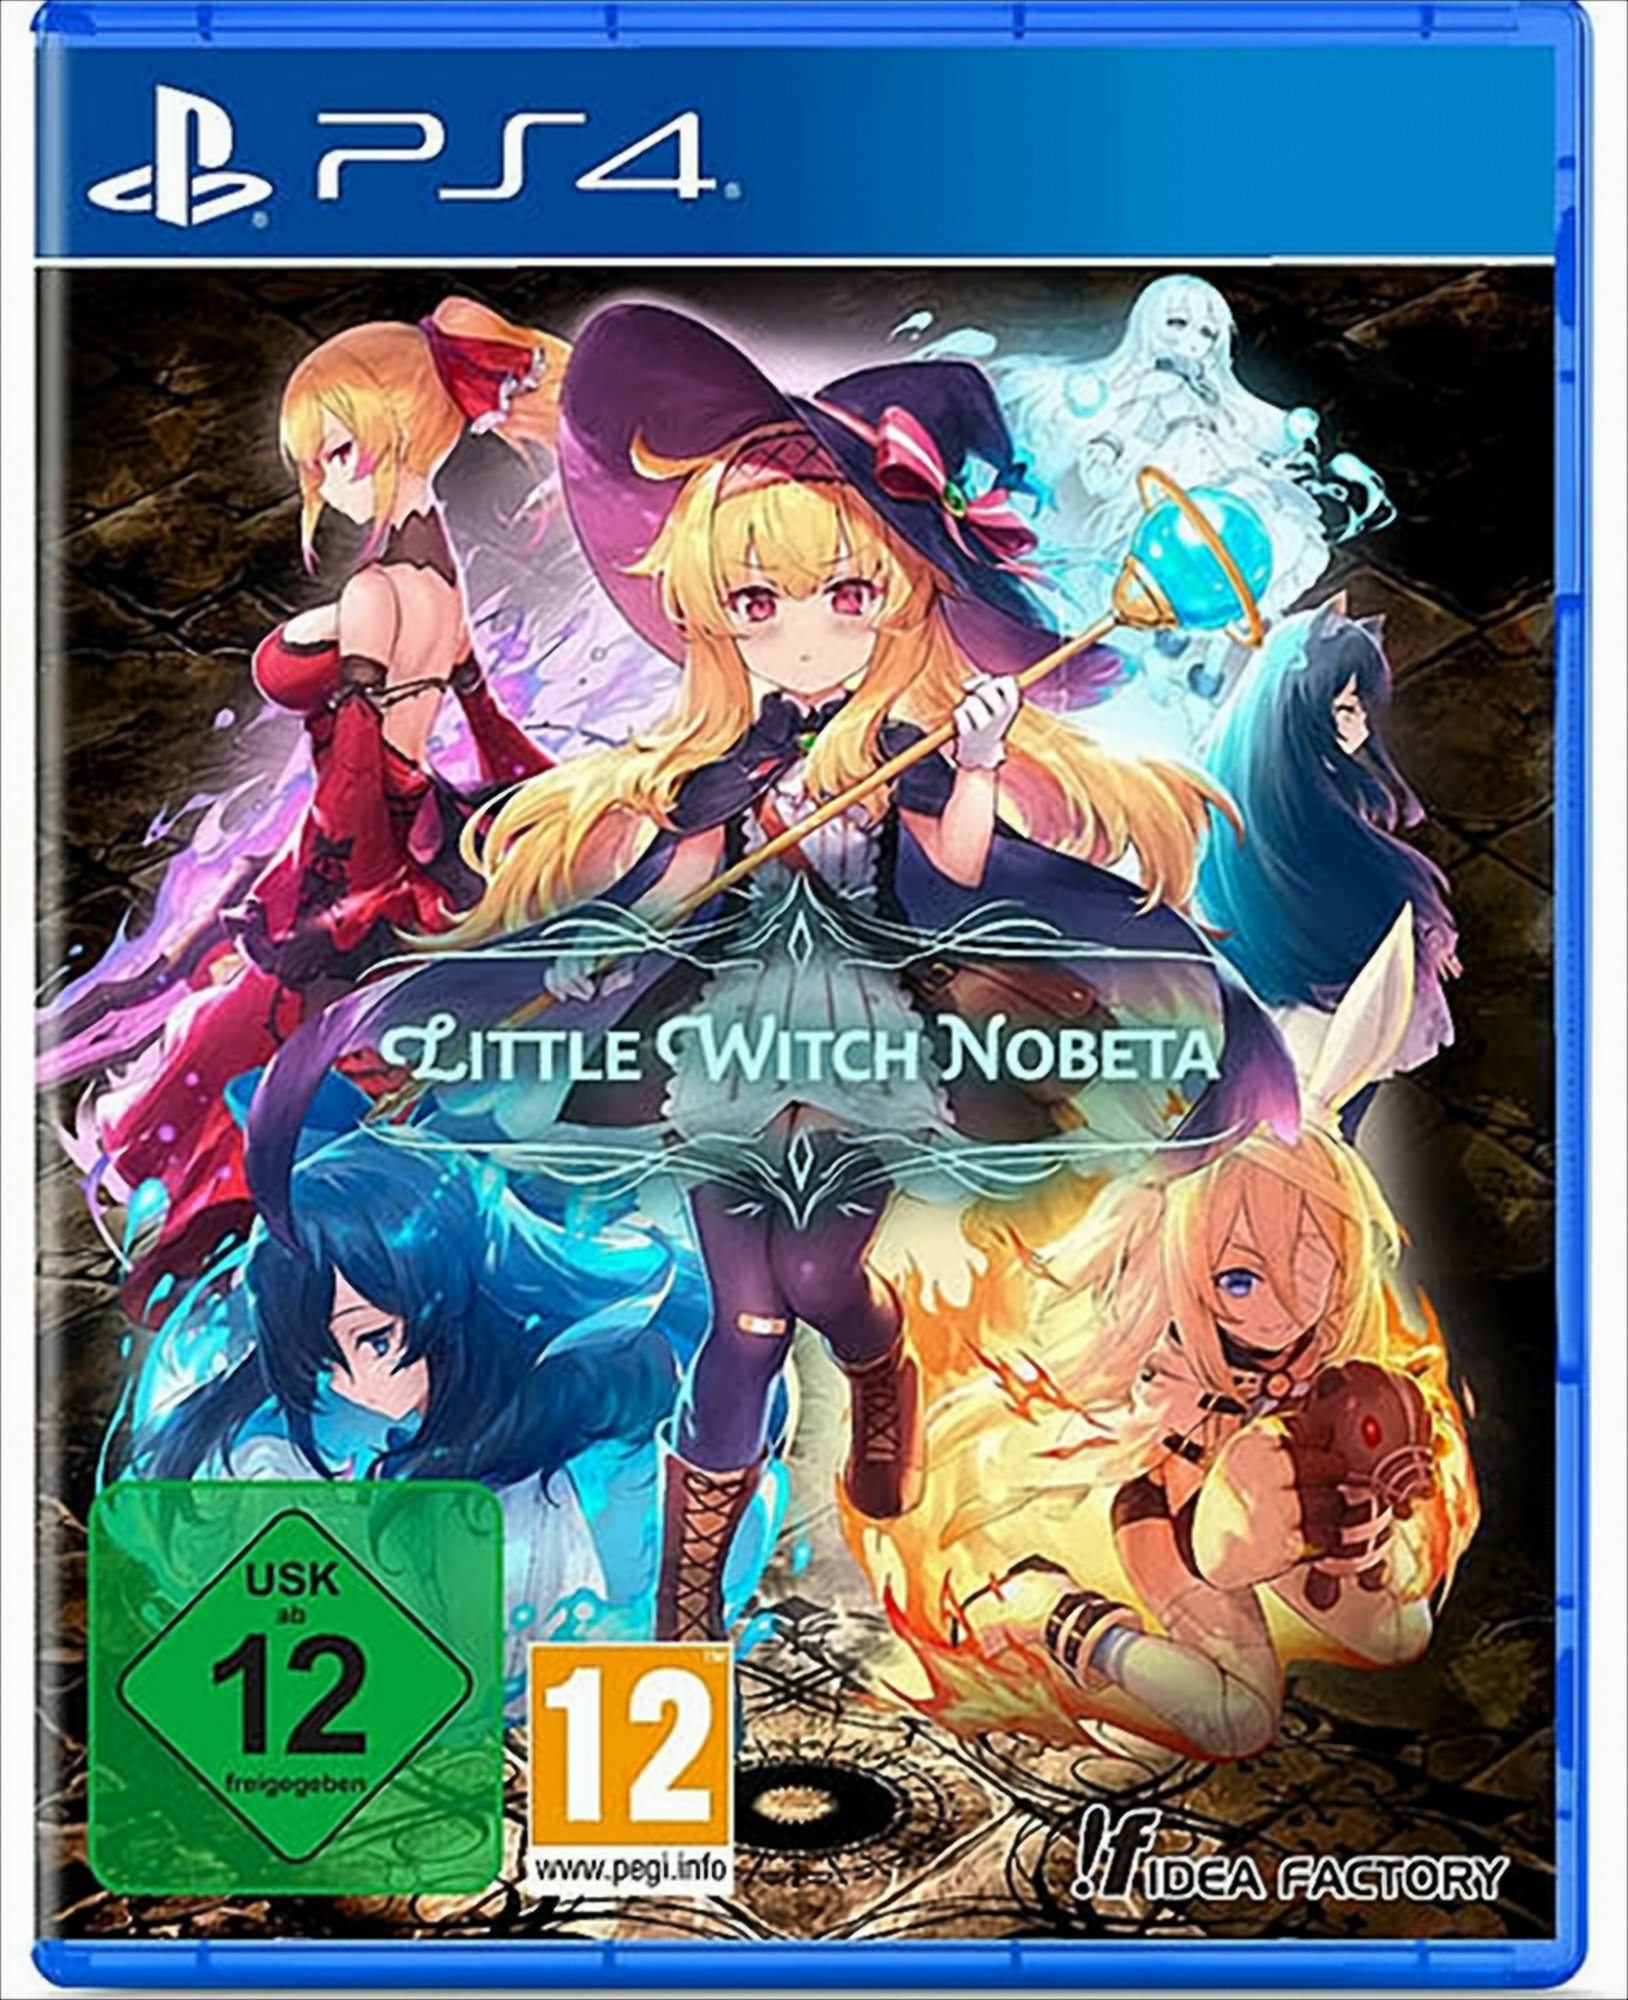 Little Witch - PS-4 4] Nobeta D1 [PlayStation